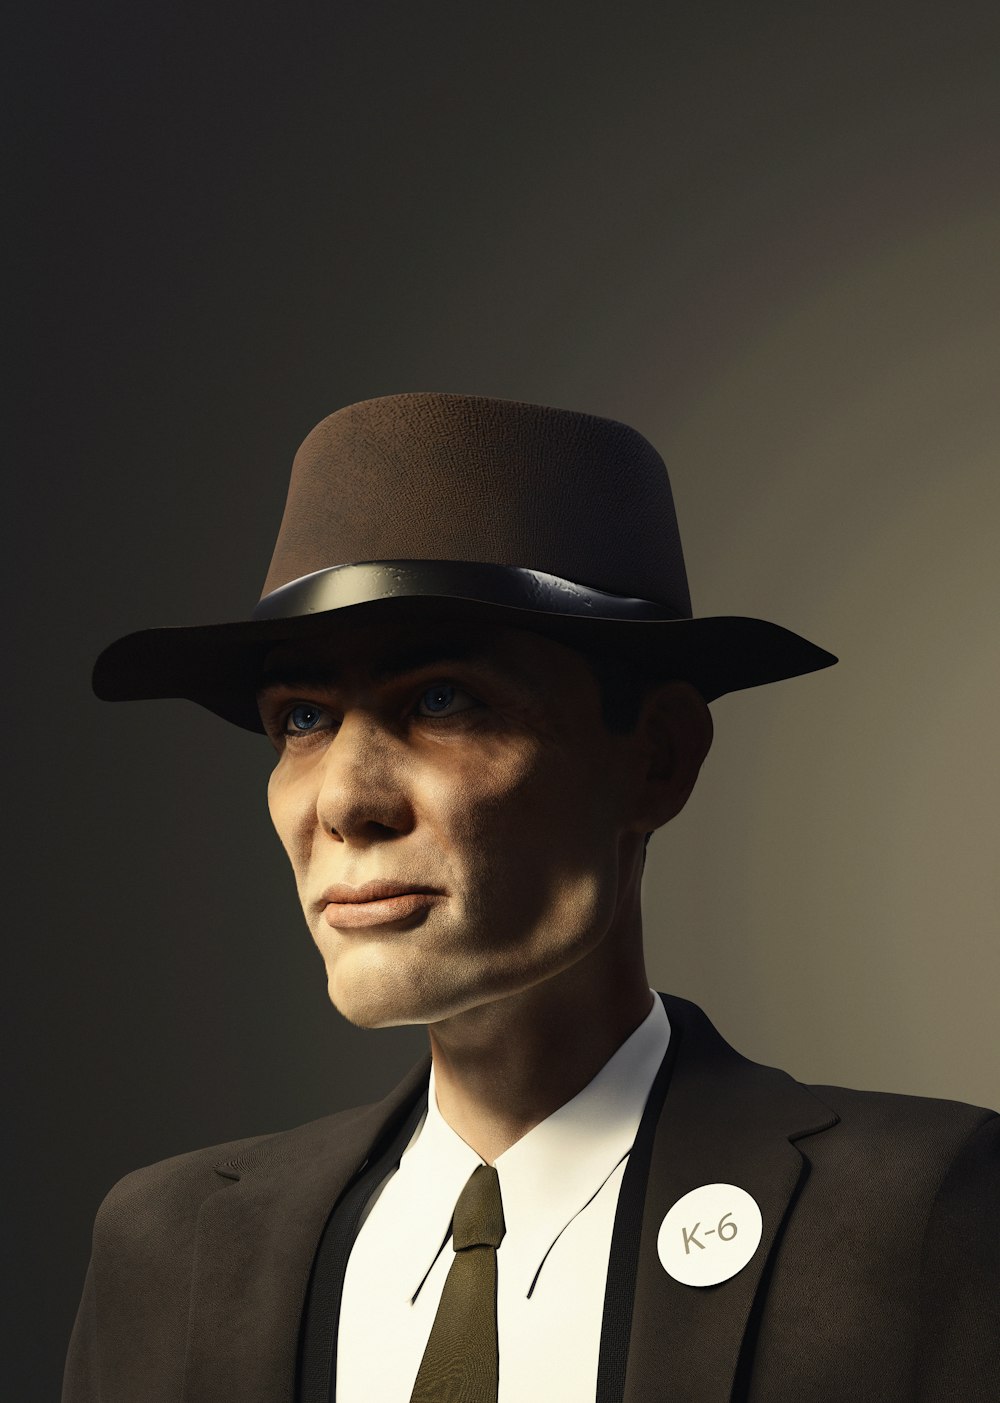 a man in a suit and tie wearing a hat